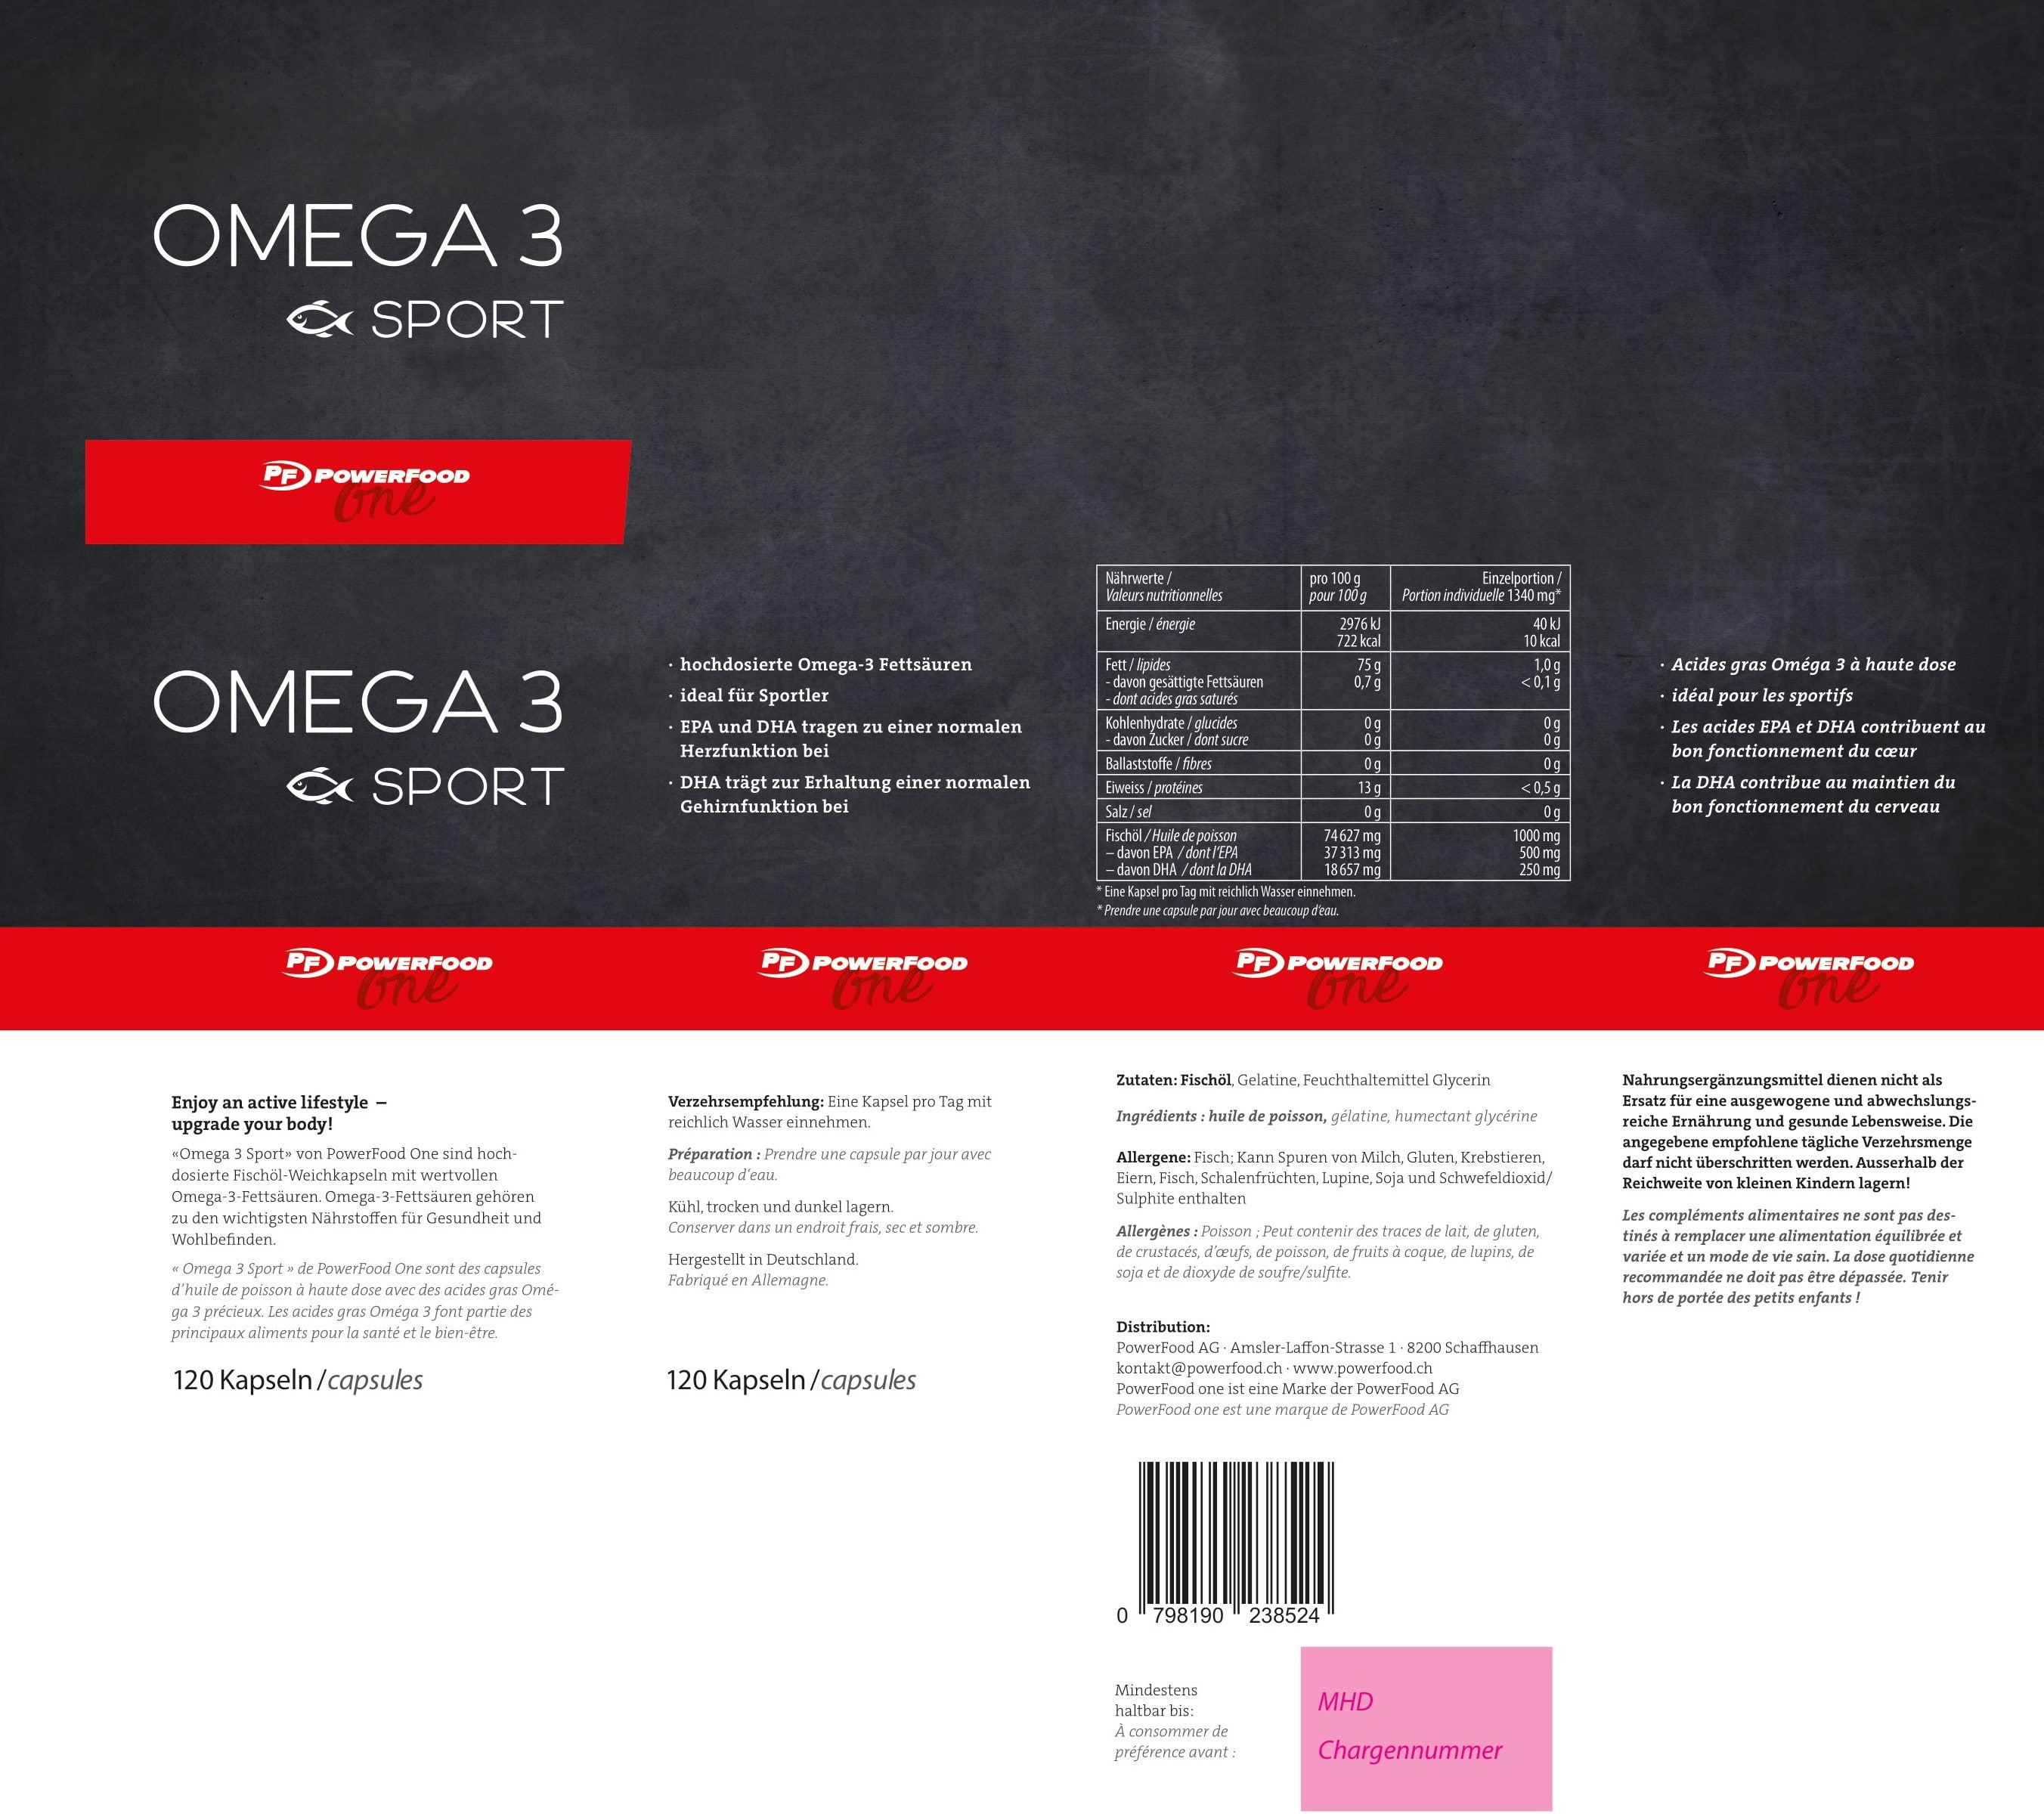 PowerFood One Omega 3 Sport (120 Caps)